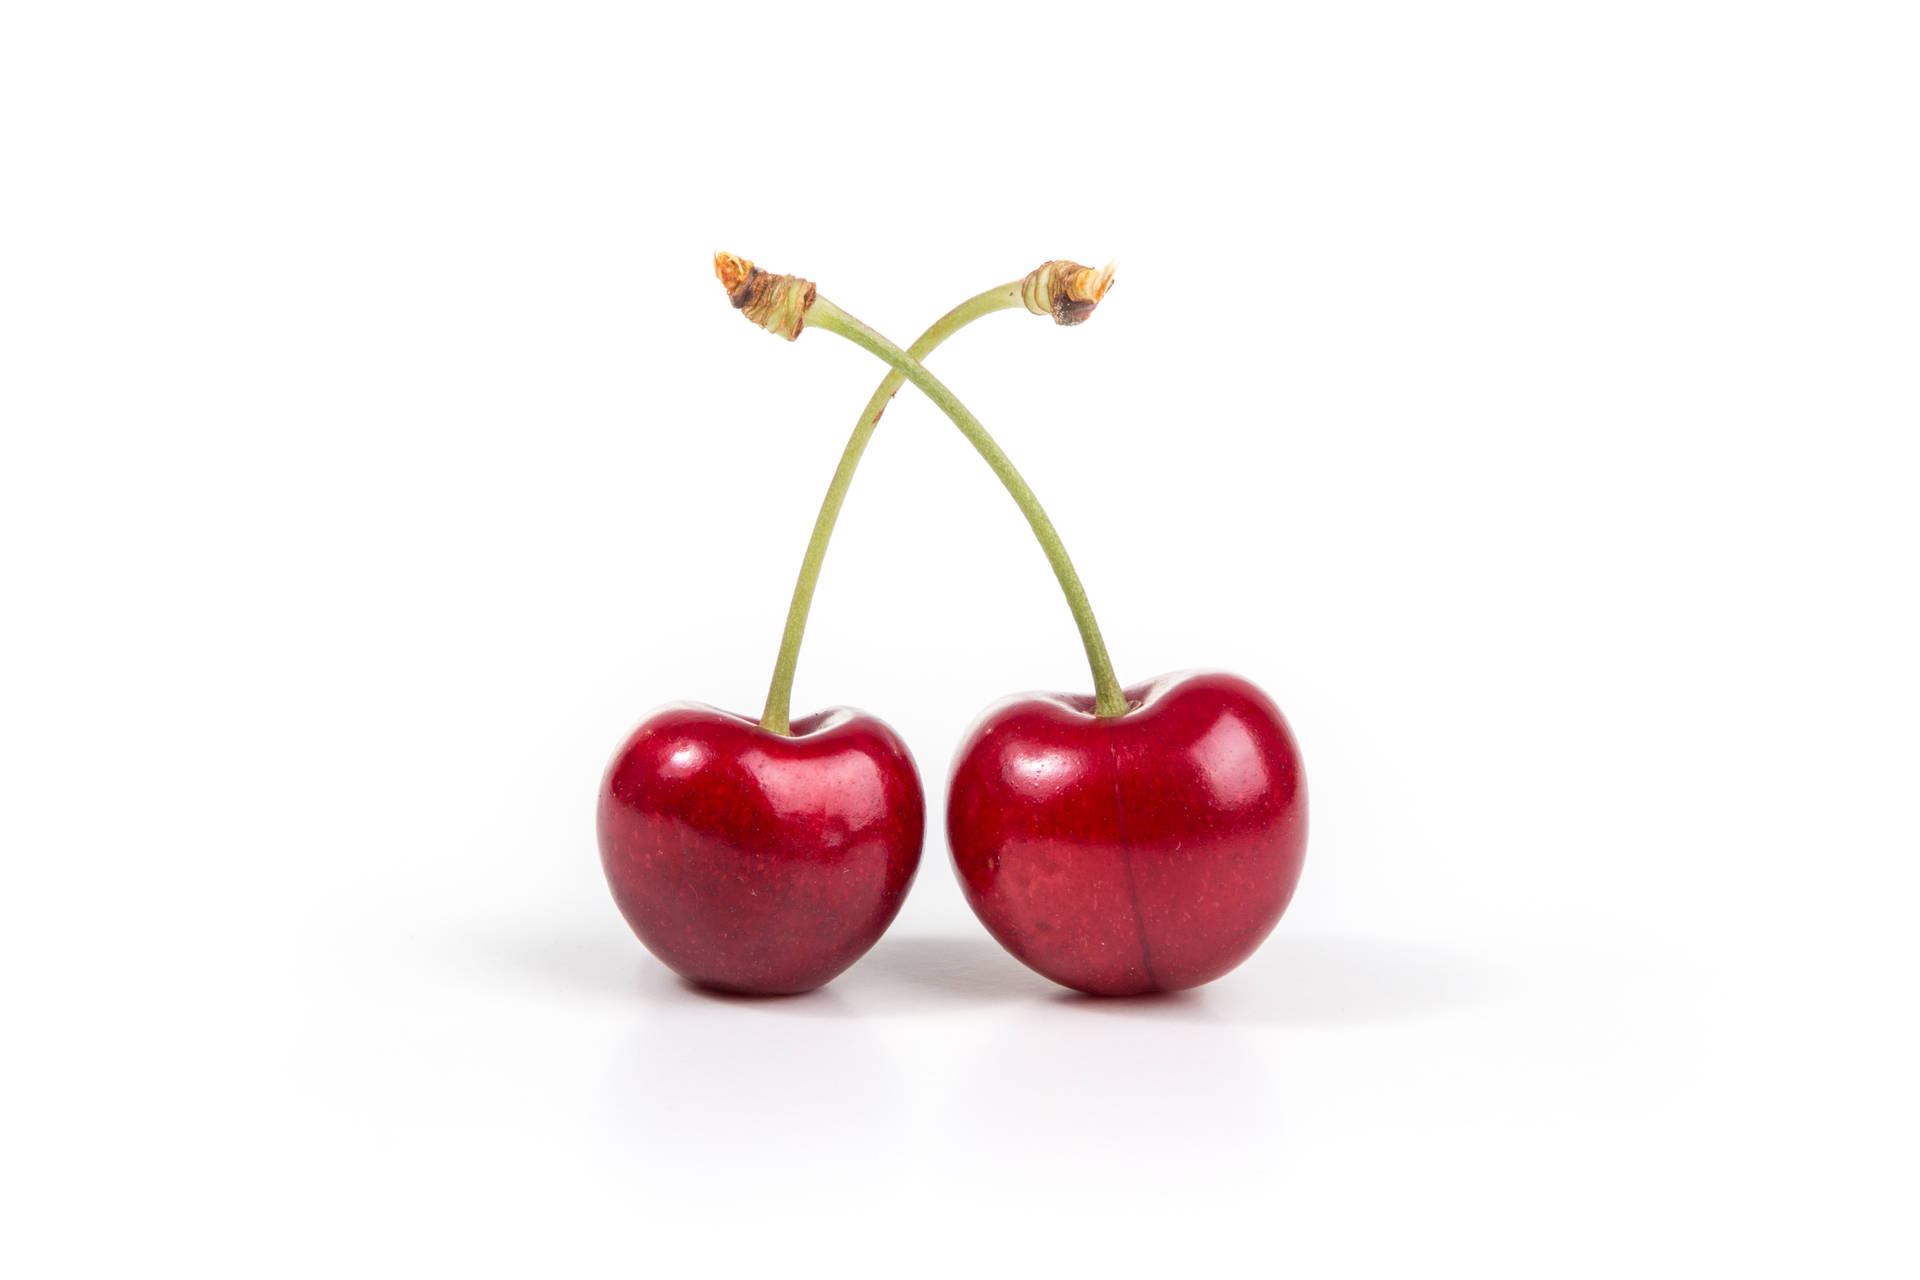 Cherry Fruit With Green Stem Background